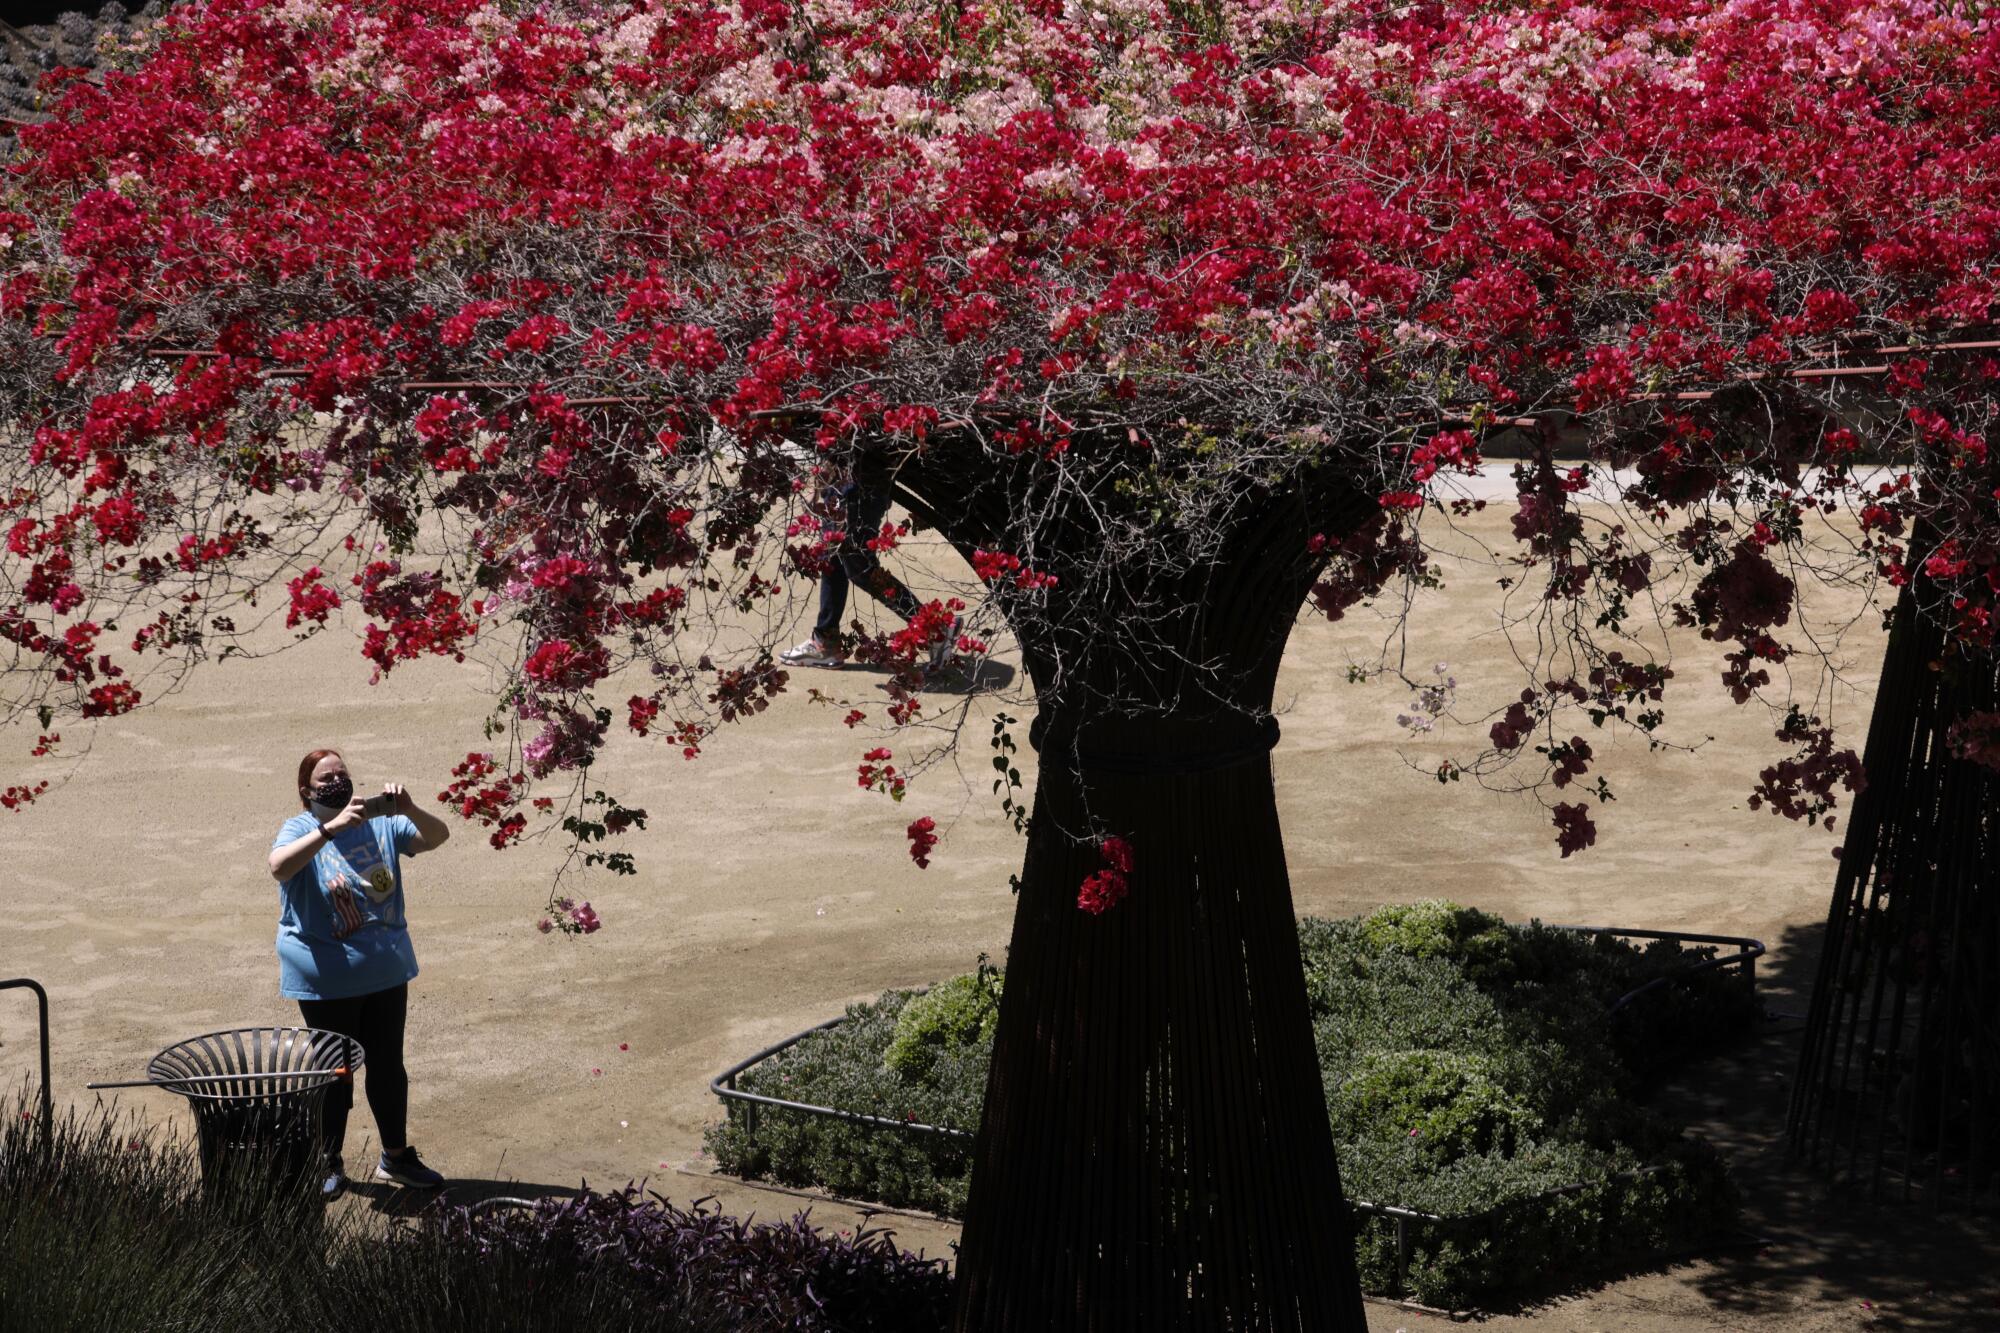 Jennifer Conway takes a picture below a cascade of flowers in the Getty Center gardens.